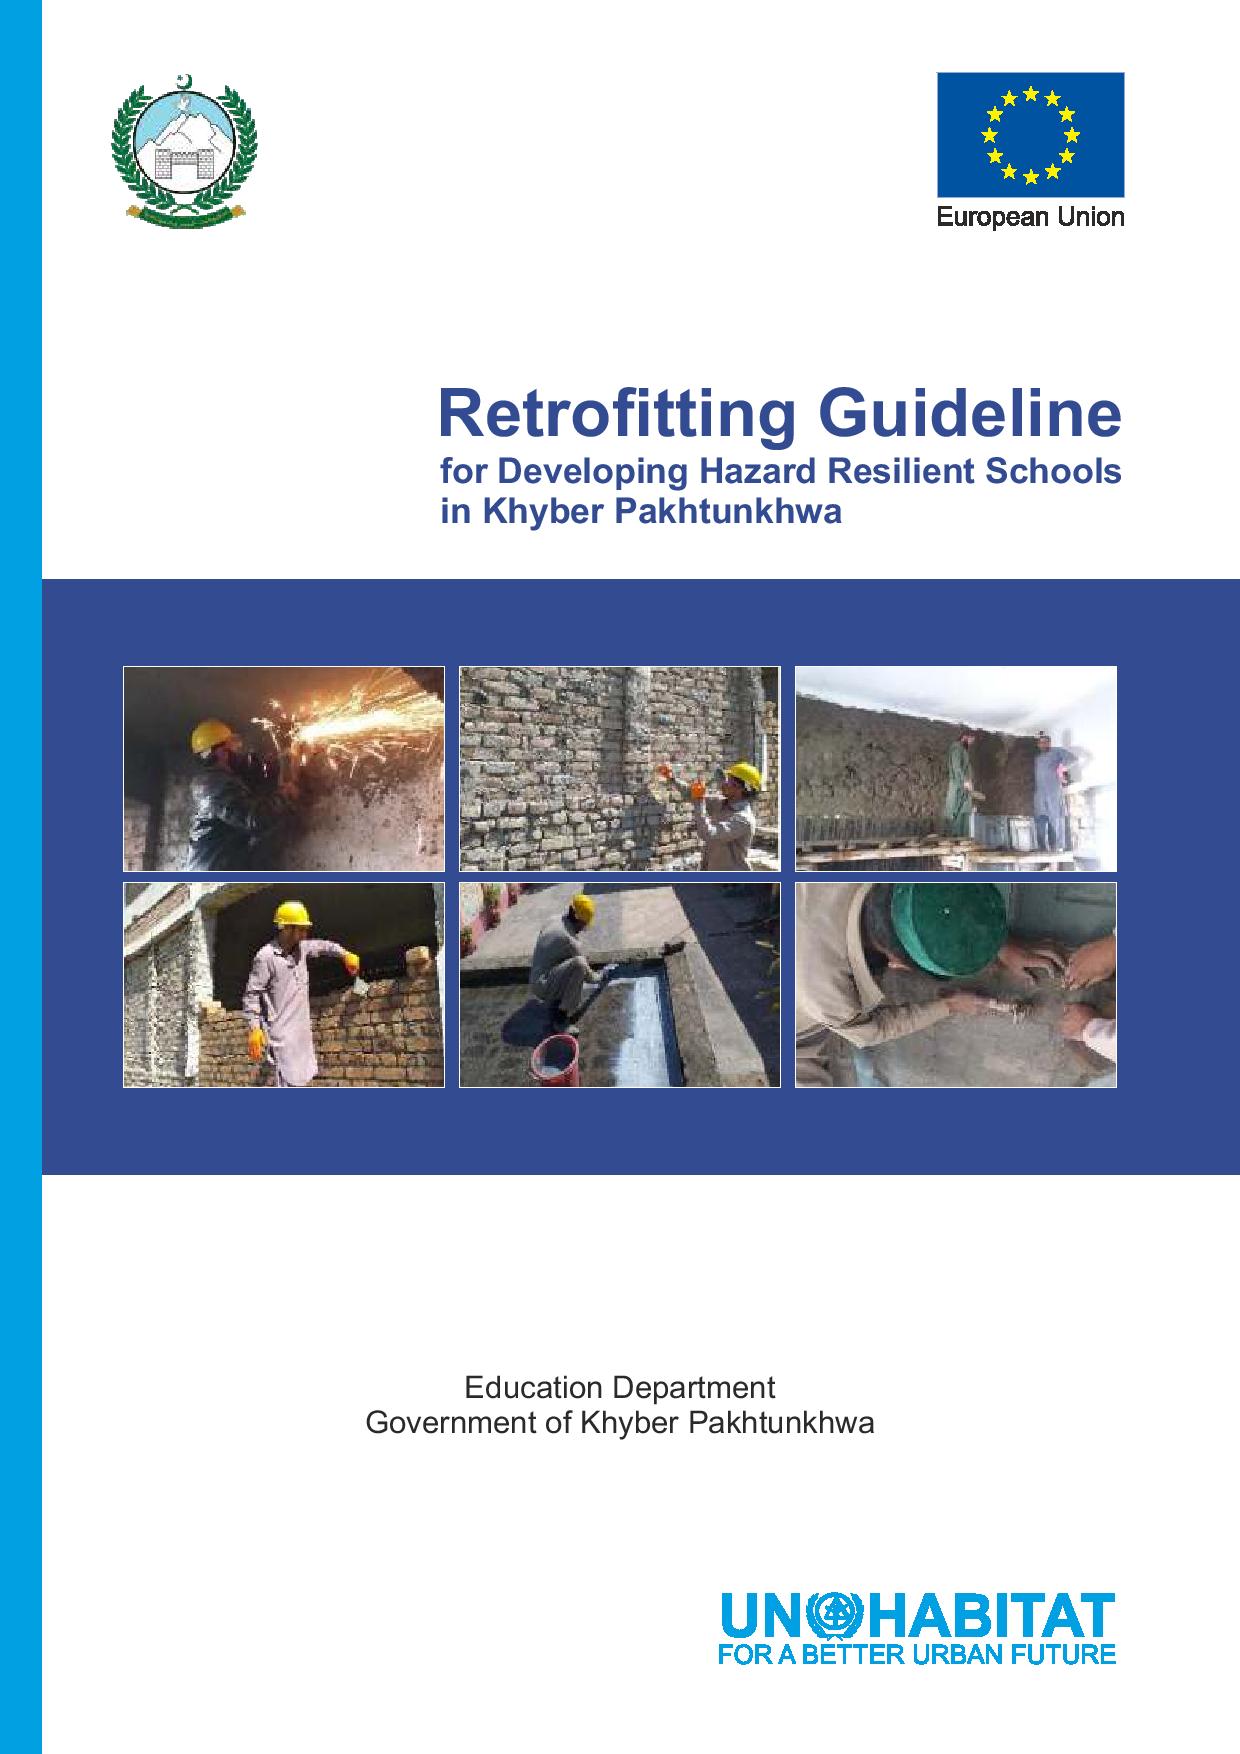 Retrofitting Guideline for Developing Hazard Resilient Schools in Khyber Pakhtunkhwa, Pakistan